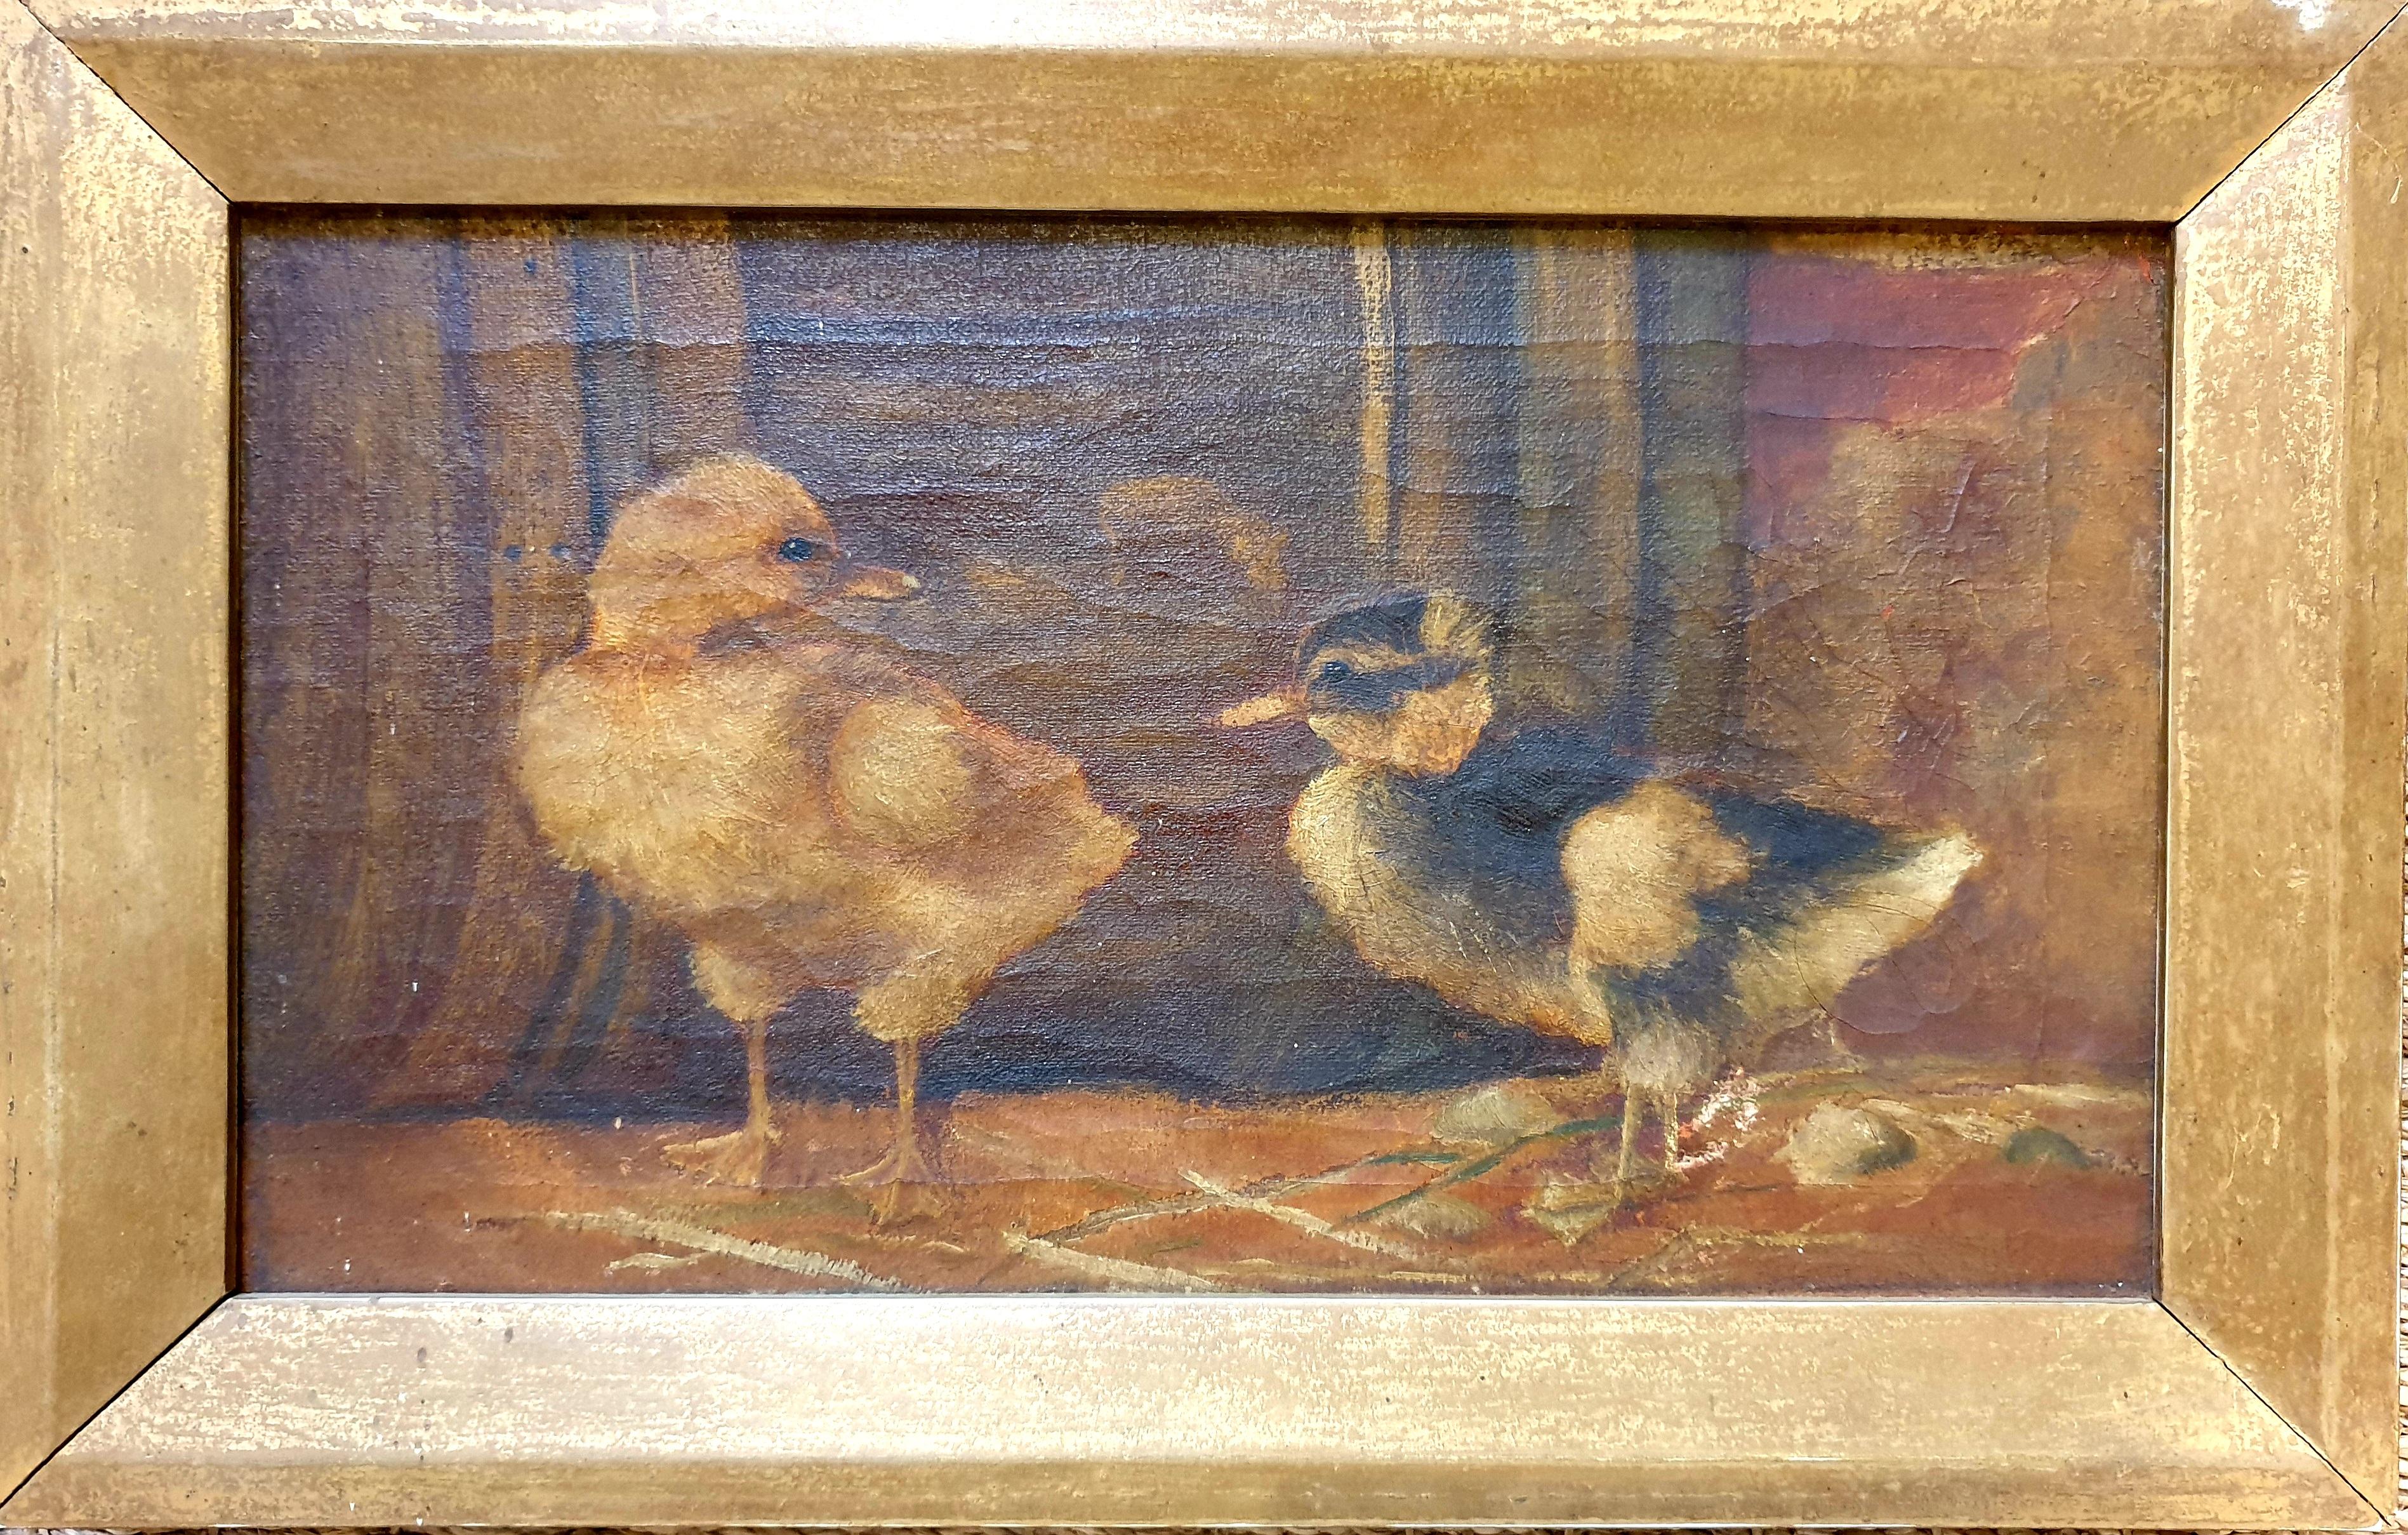 The Ducklings. Late 19th Century Oil on Canvas.